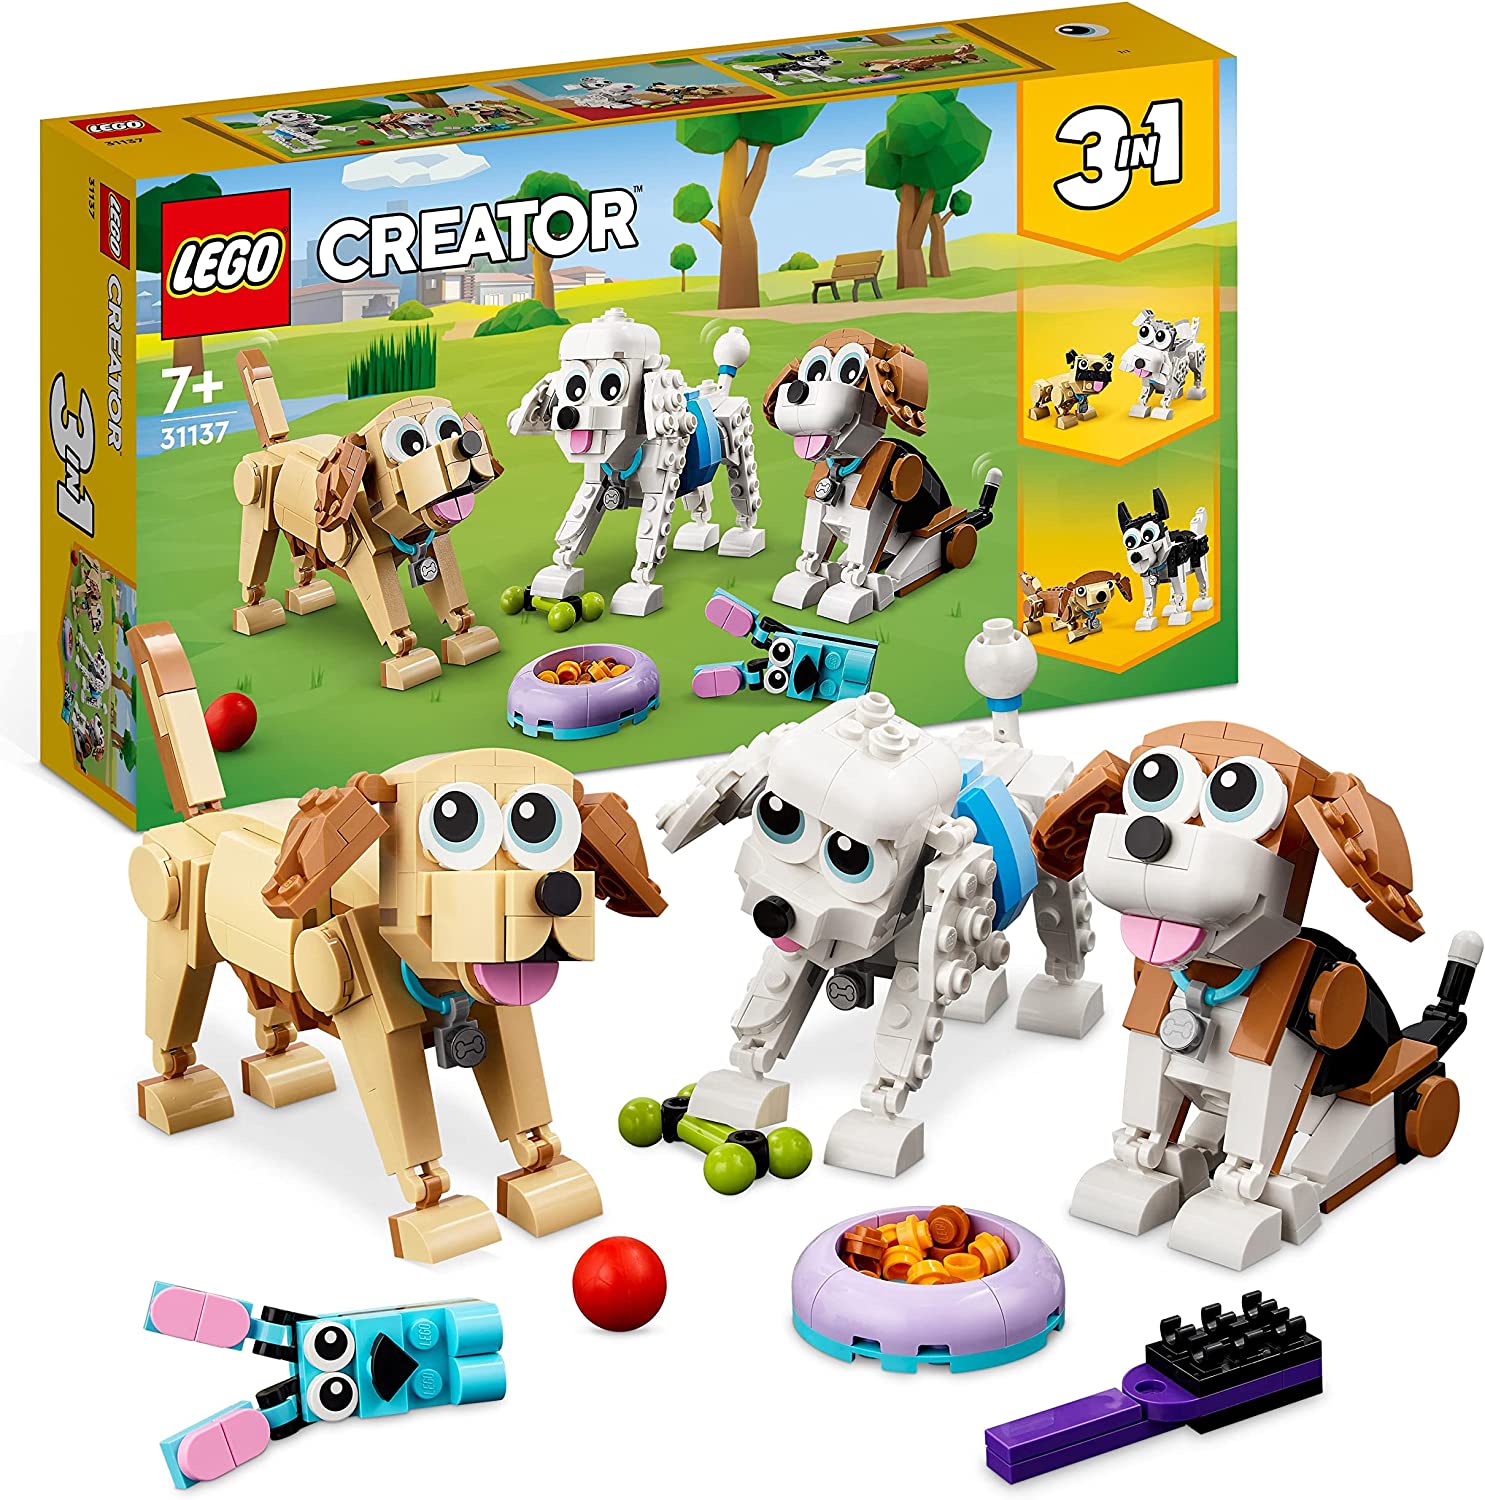 LEGO 31137 Creator 3-in-1 Cute Dog Easter Gift Set With Dachshund, Pug, Poodle Animal Figures and More, Easter Decoration Toy for Children from 7 Years, Gift Idea for Dog Lovers at Easter 2023